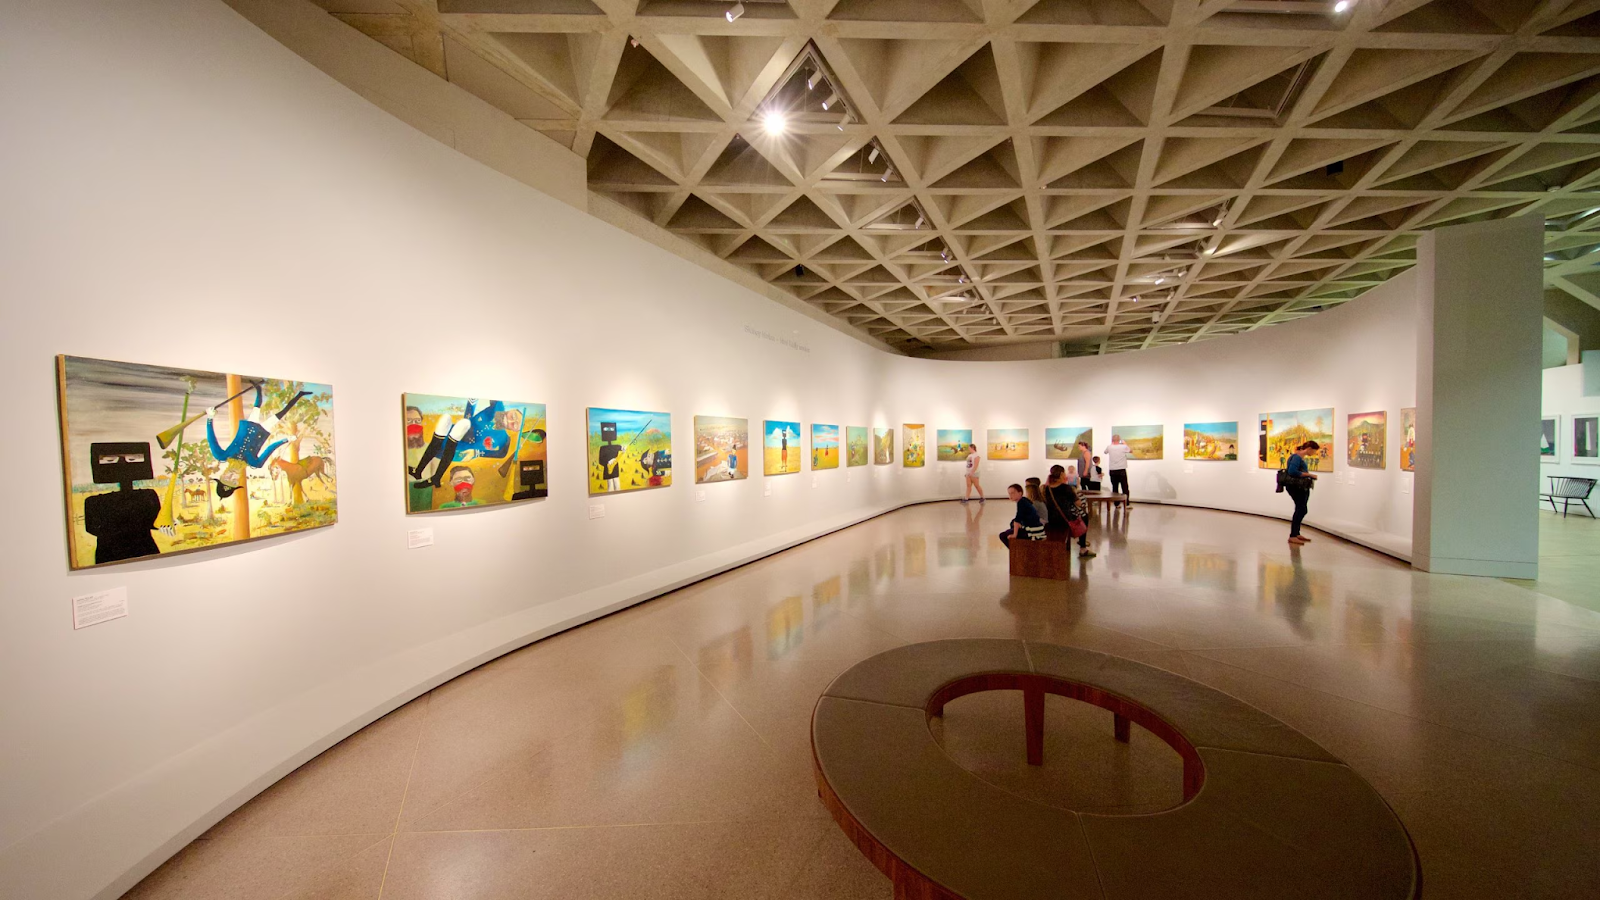 Discover the Wonders of Art at the National Gallery of Australia